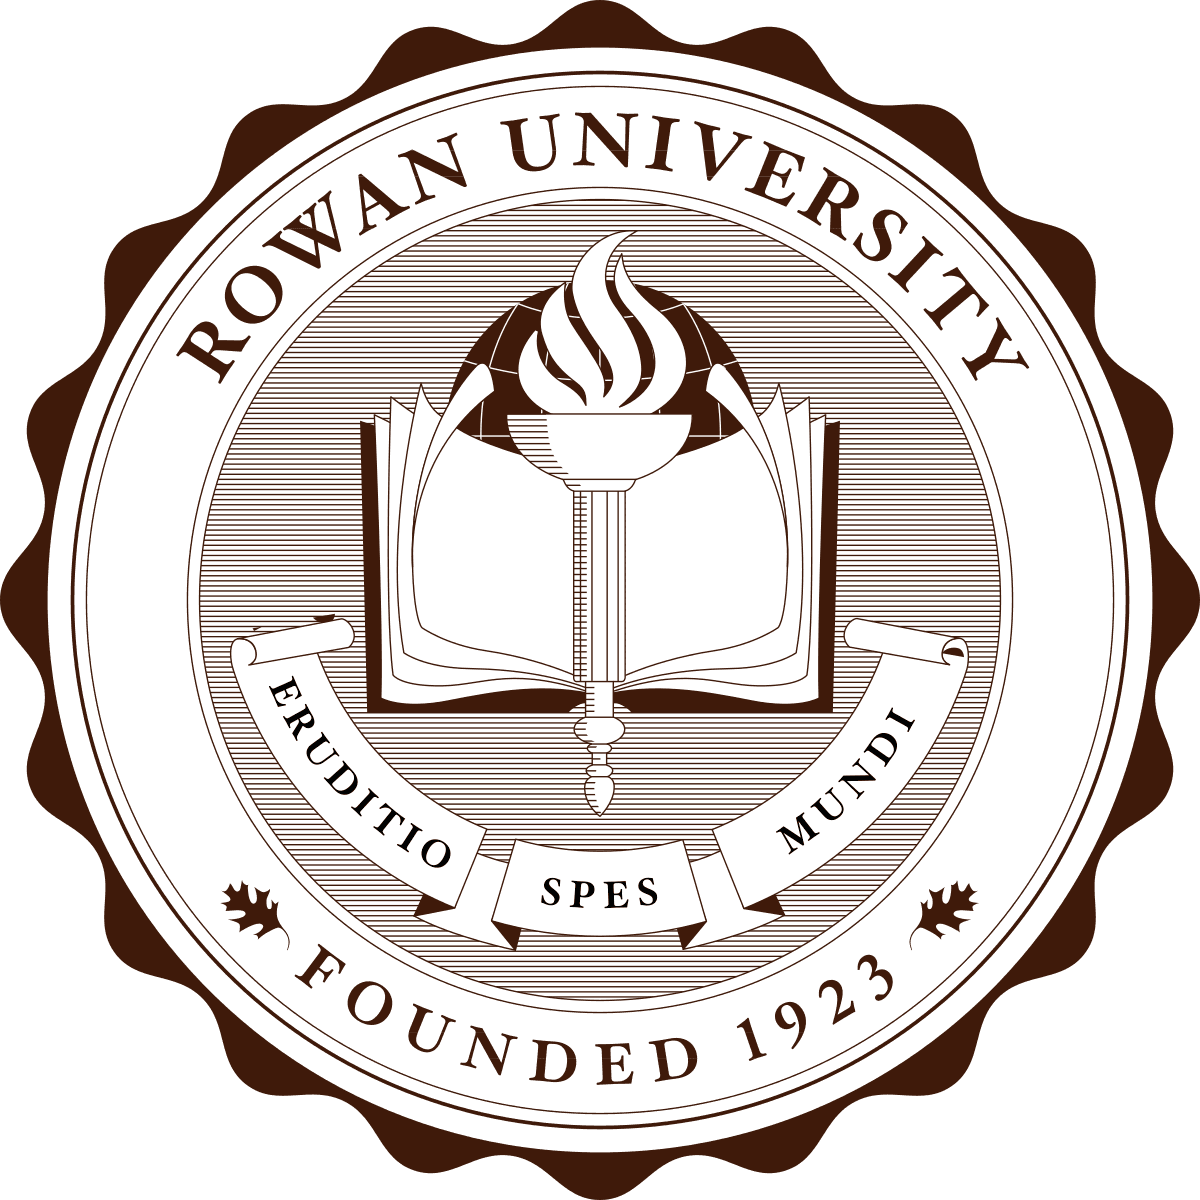 Ph.D. in Chemical Engineering